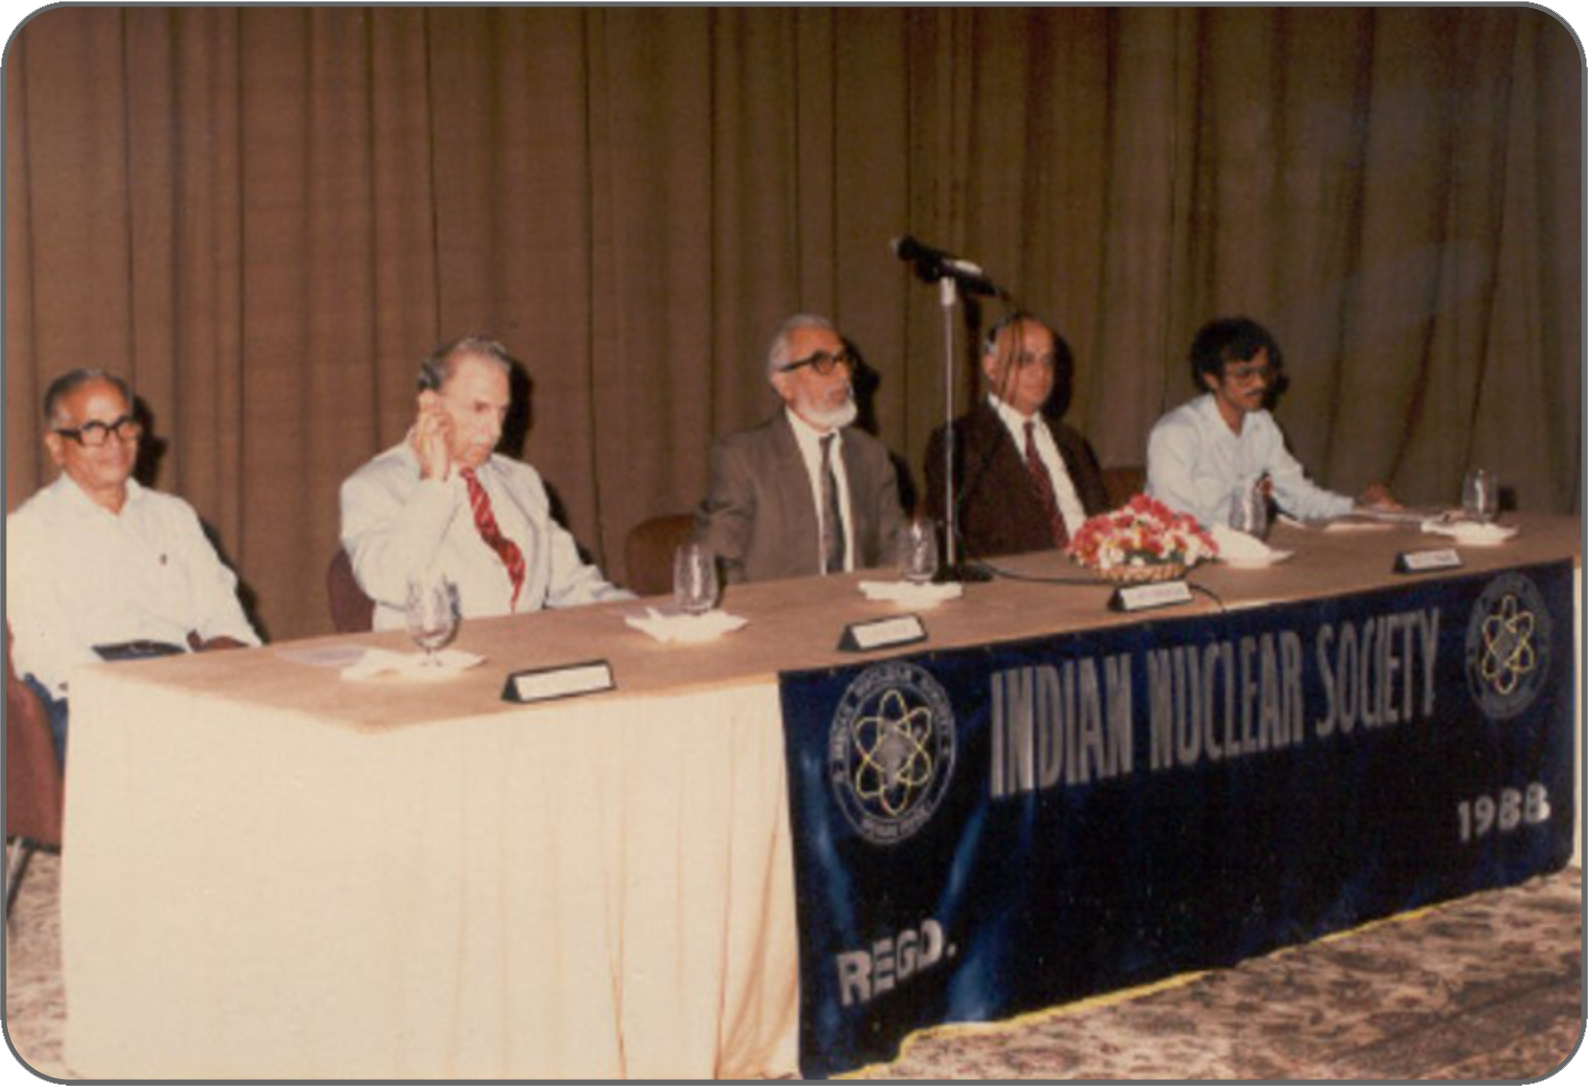 Indian Nuclear Society Inauguration Day in 1988